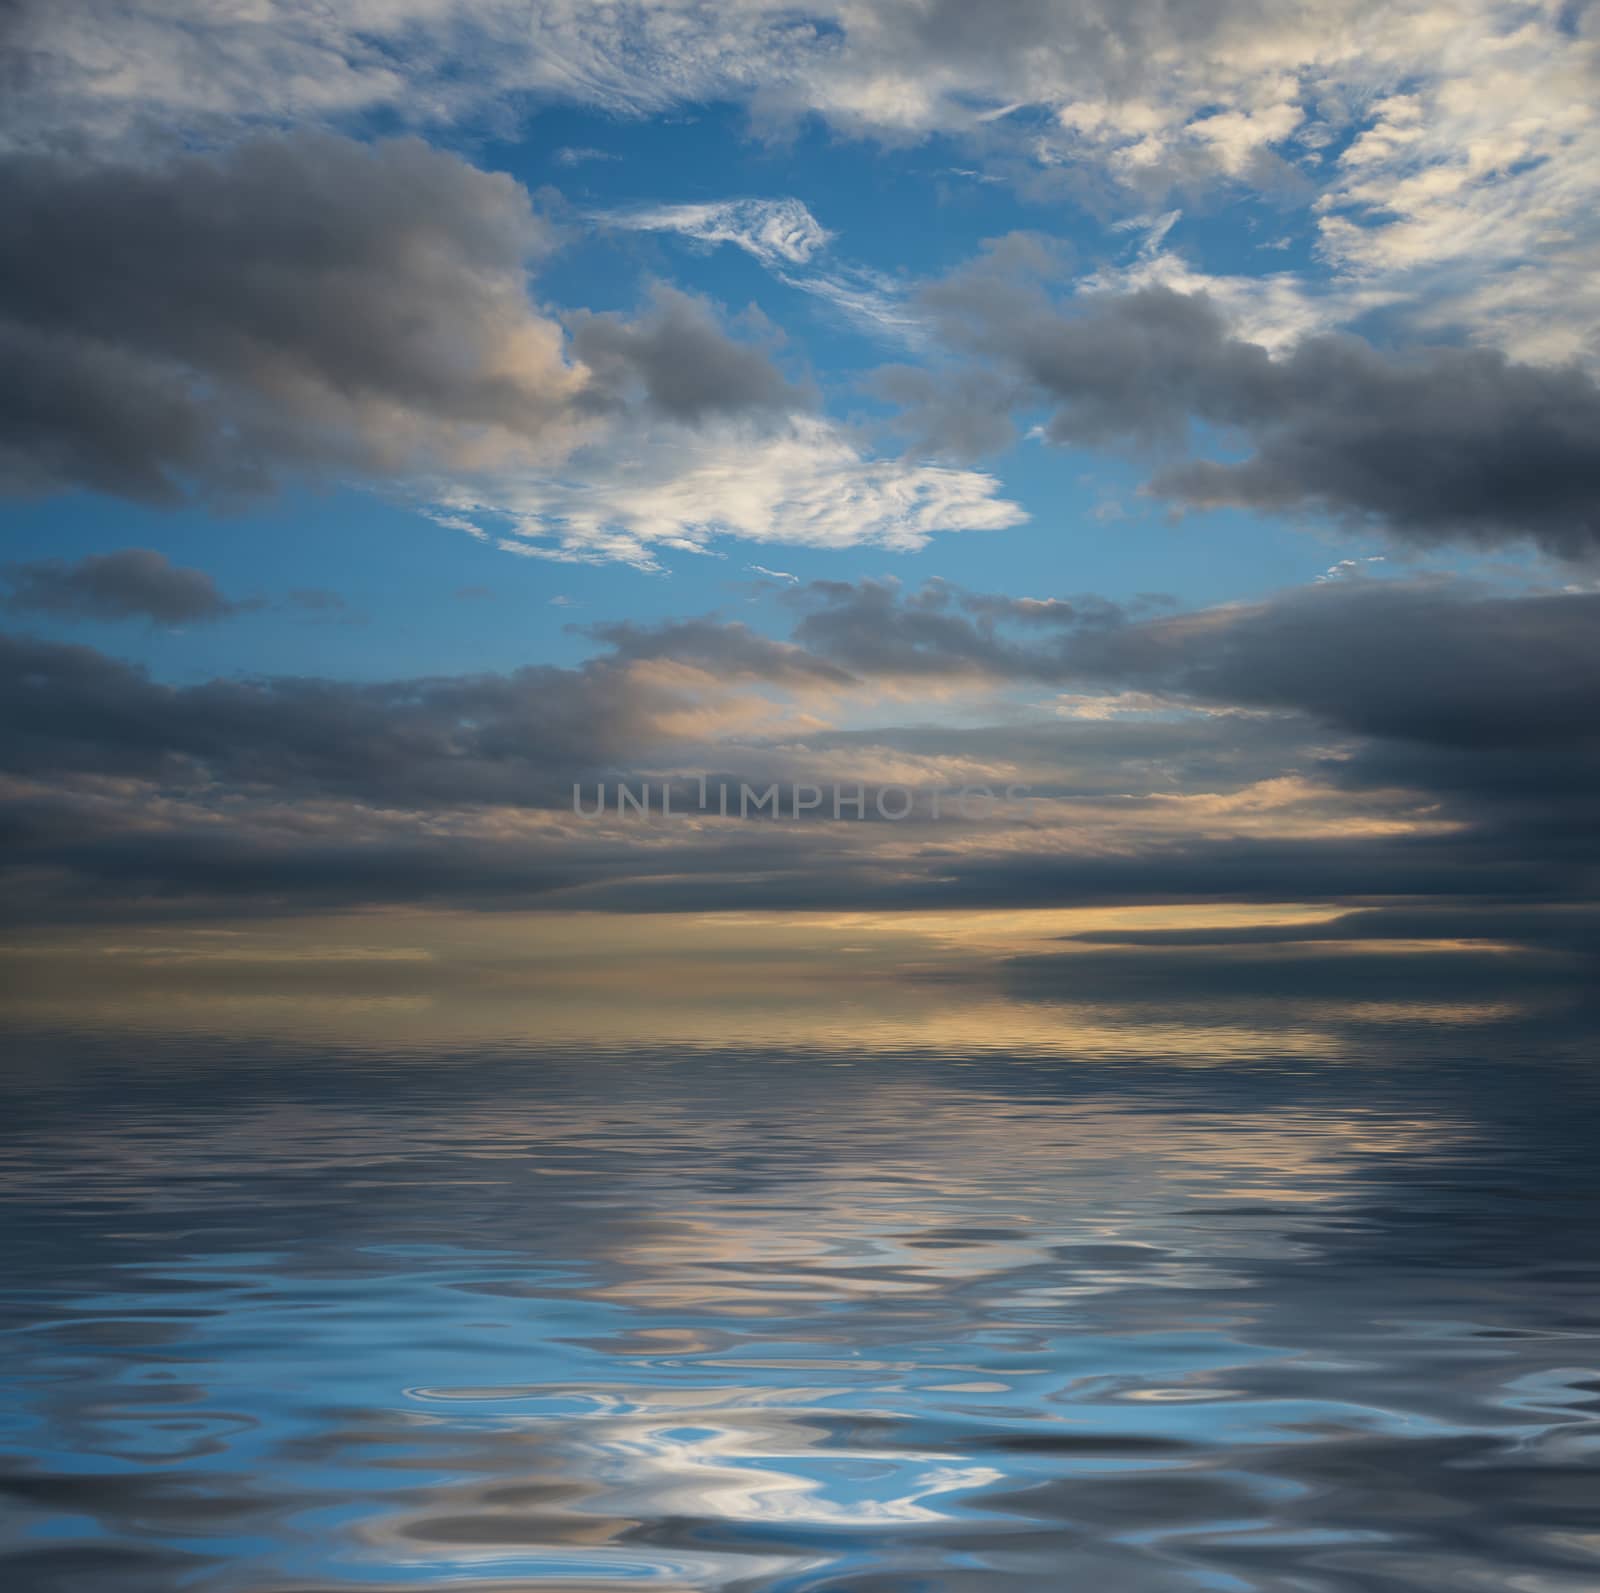 Beautiful seascape with dramatic sunset sky with dark clouds reflected in a water surface with small waves